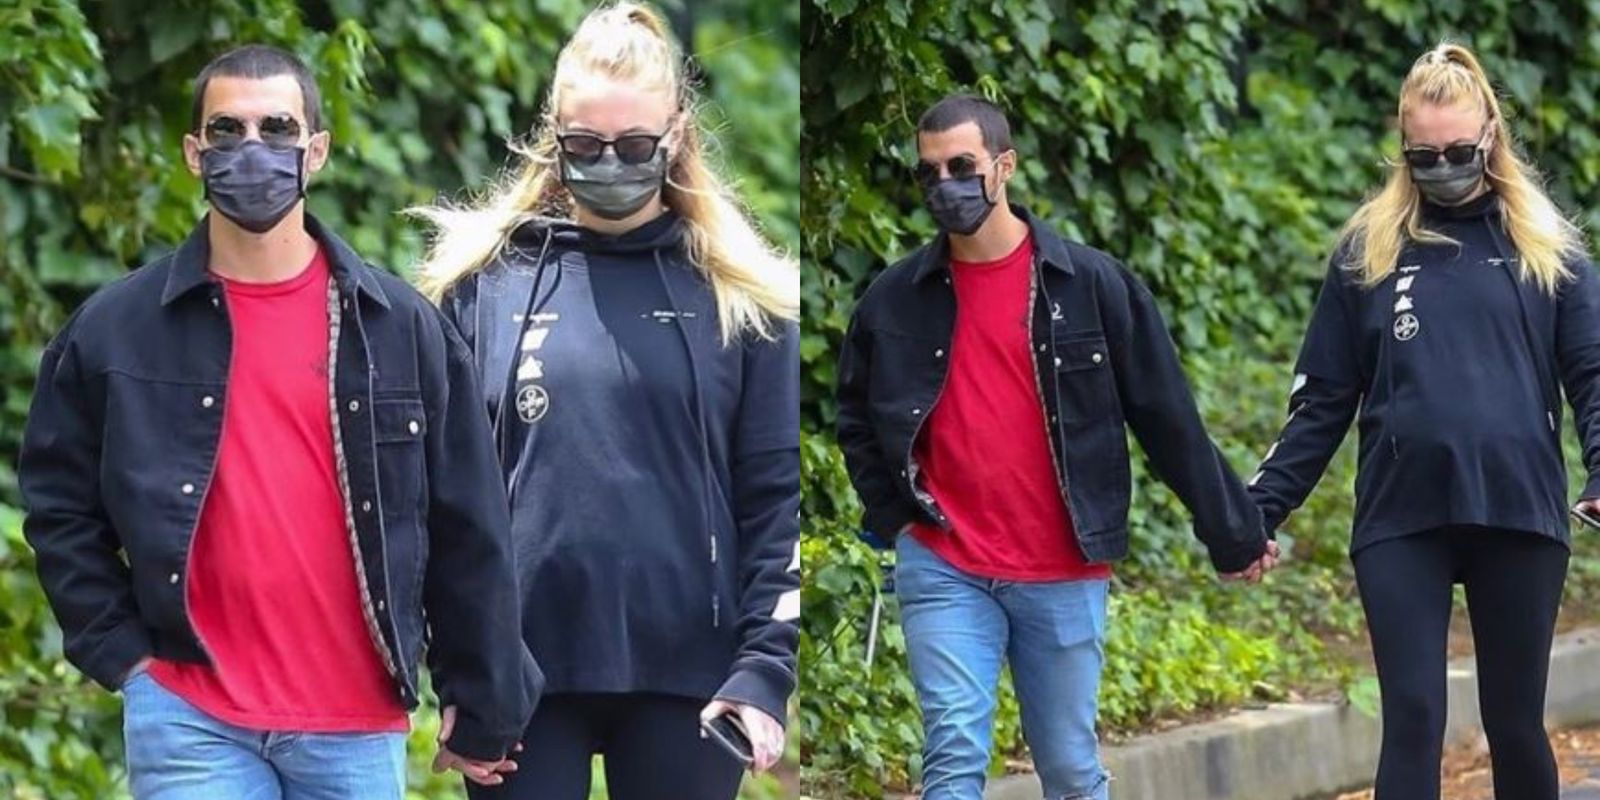 Sophie Turner Flaunts Her Baby Bump For The First Time Since Pregnancy Rumors, Steps Out For A Walk With Joe Jonas